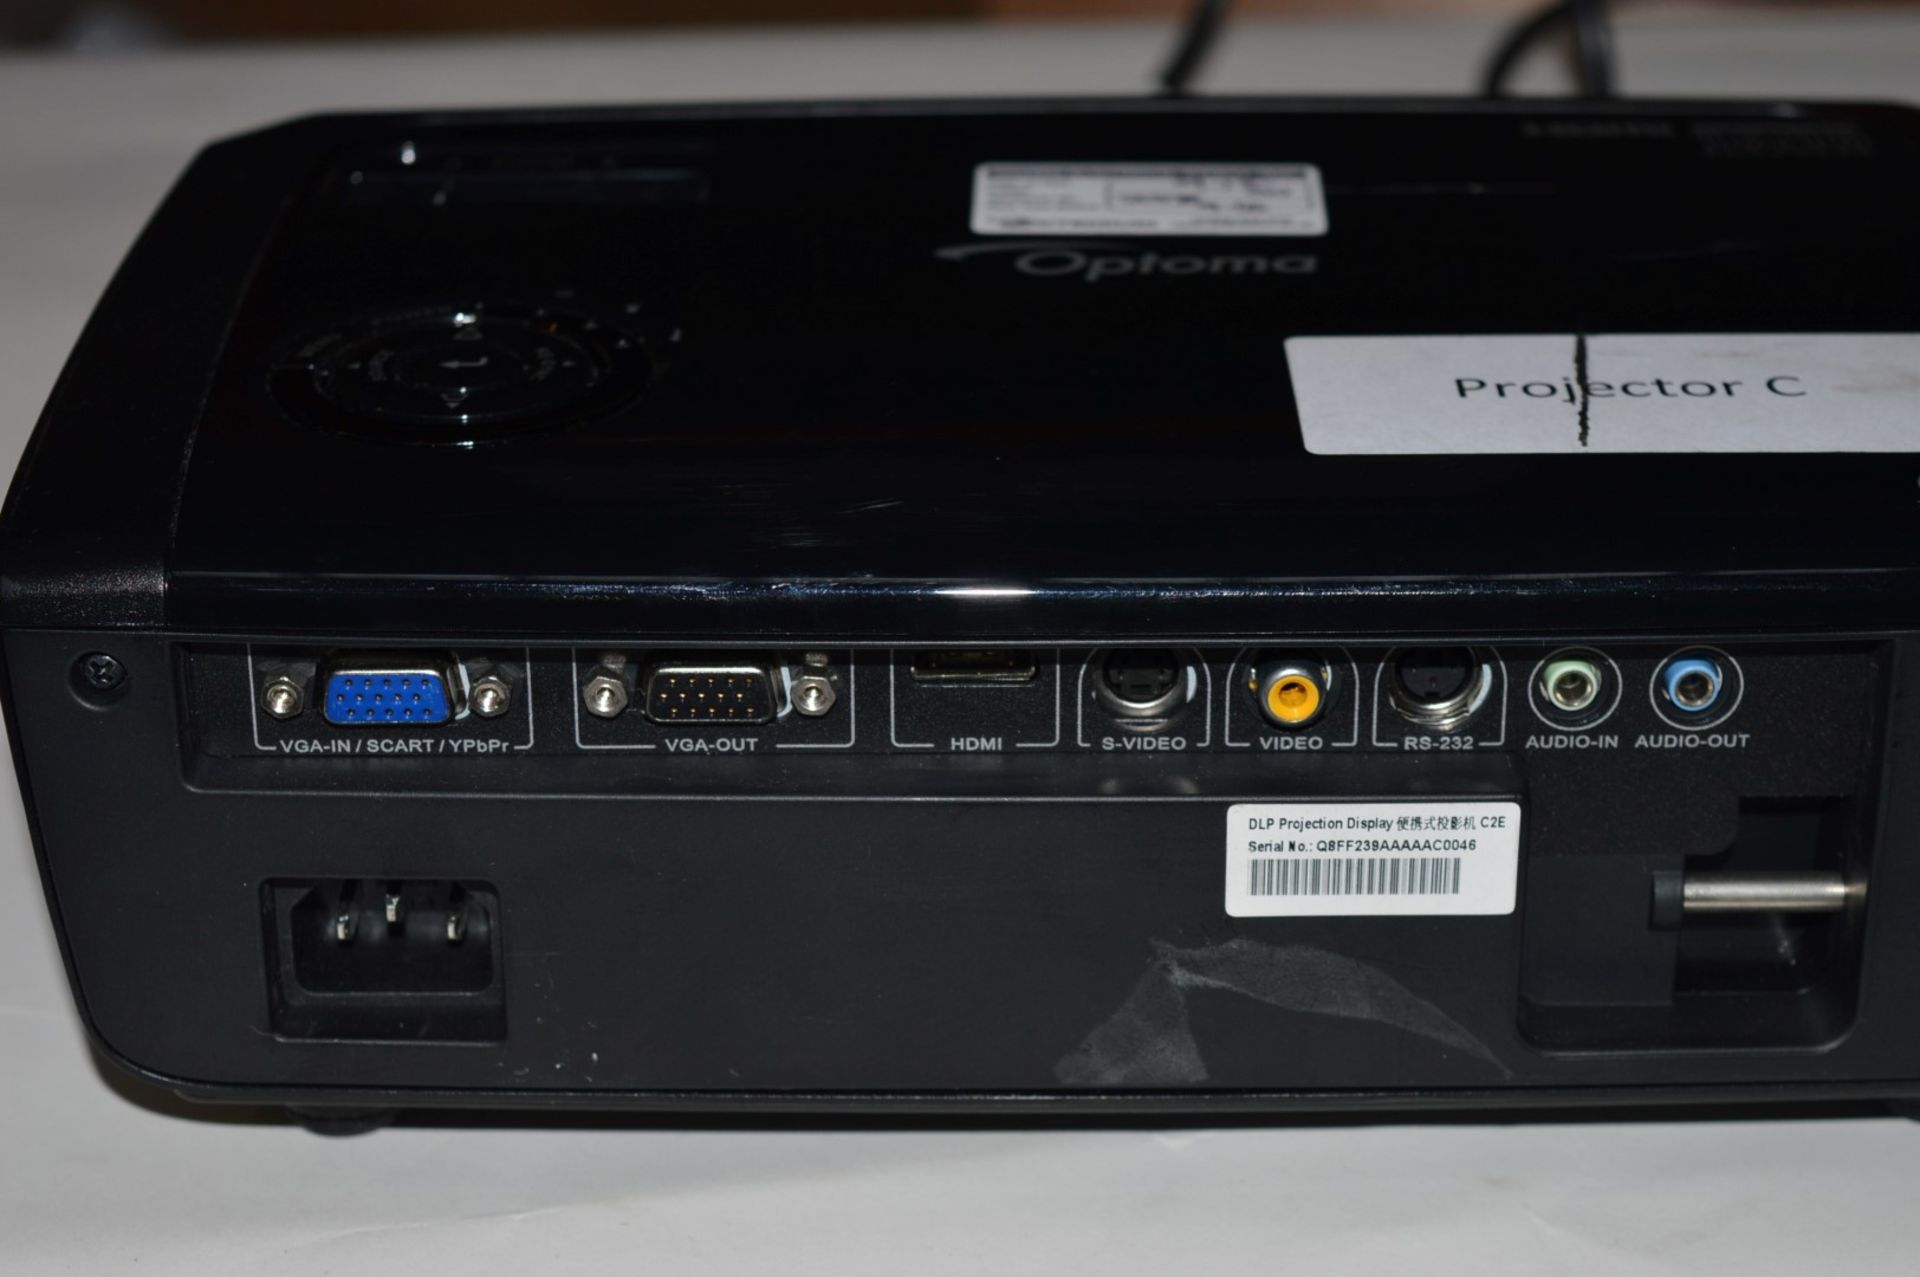 1 x Optoma DLP Projector With HDMI 16:10 Enhanced Widescreen - Very Good Condition - Good Working - Image 5 of 7